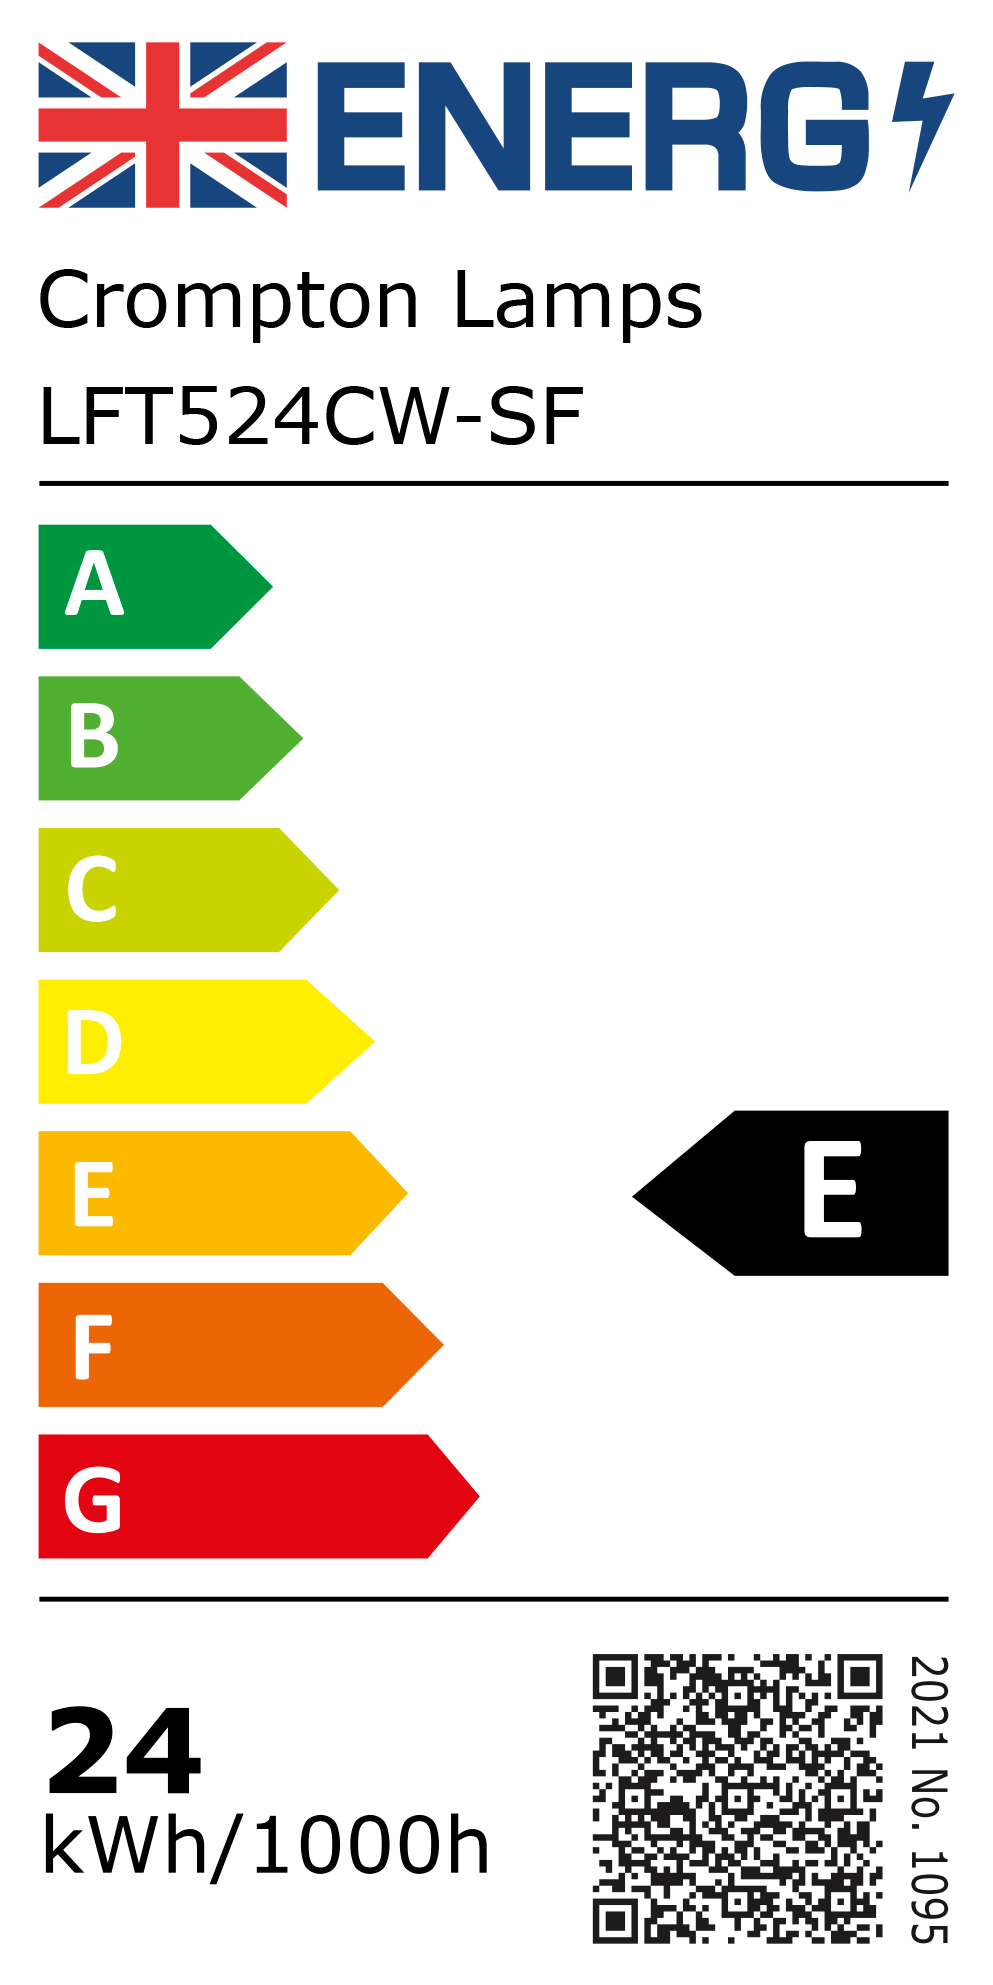 New 2021 Energy Rating Label: Stock Code LFT524CW-SF